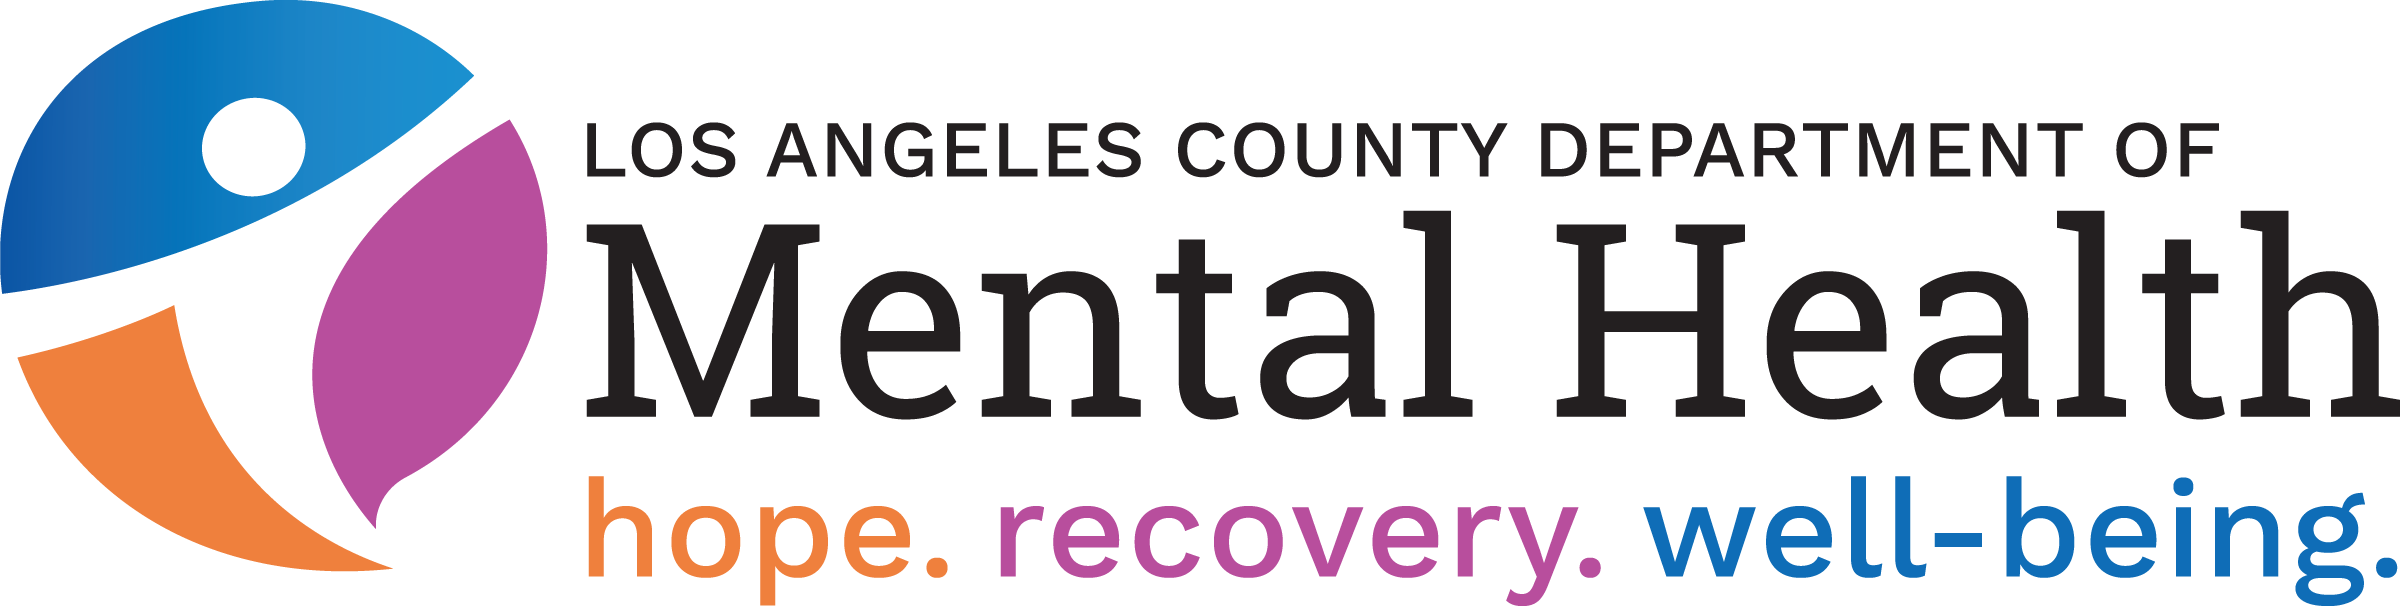 Los Angeles County Department of Mental Health logo